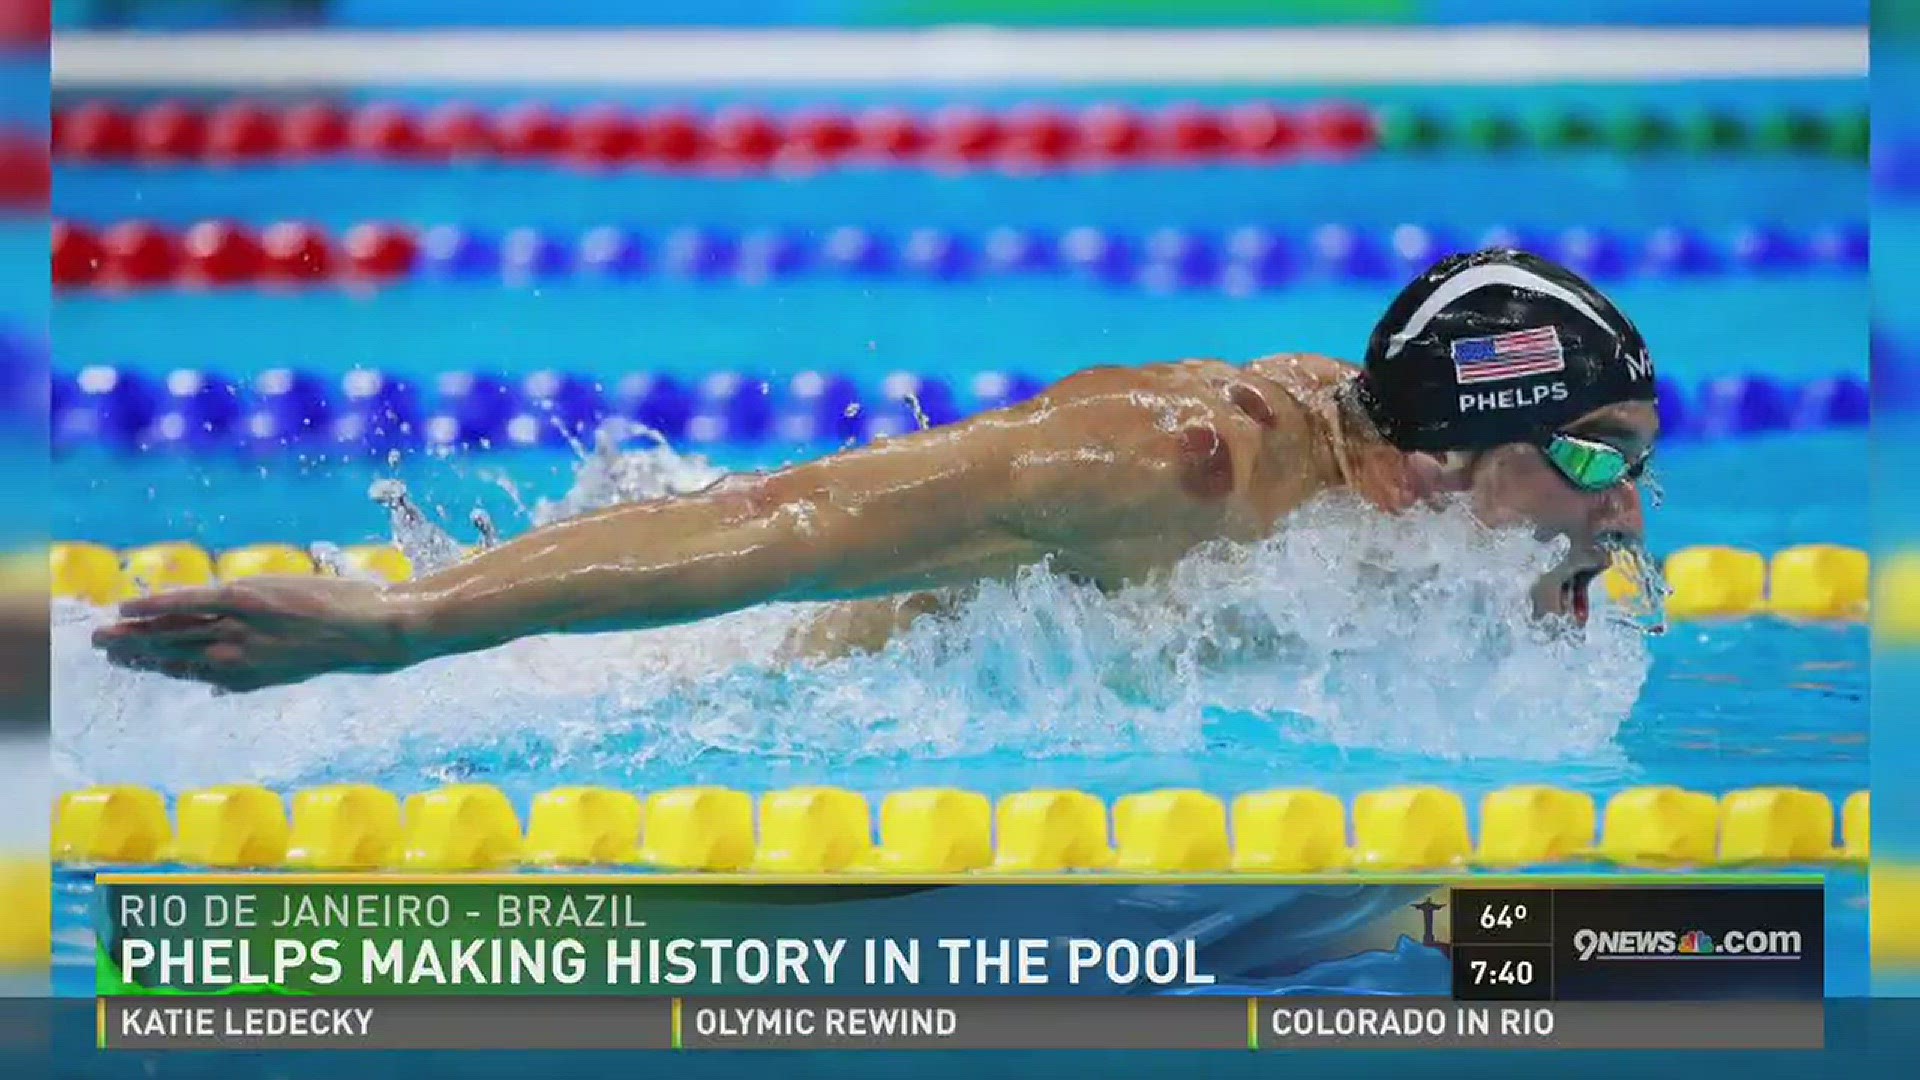 A recap of Tuesday night's swimming events for Michael Phelps and Team USA